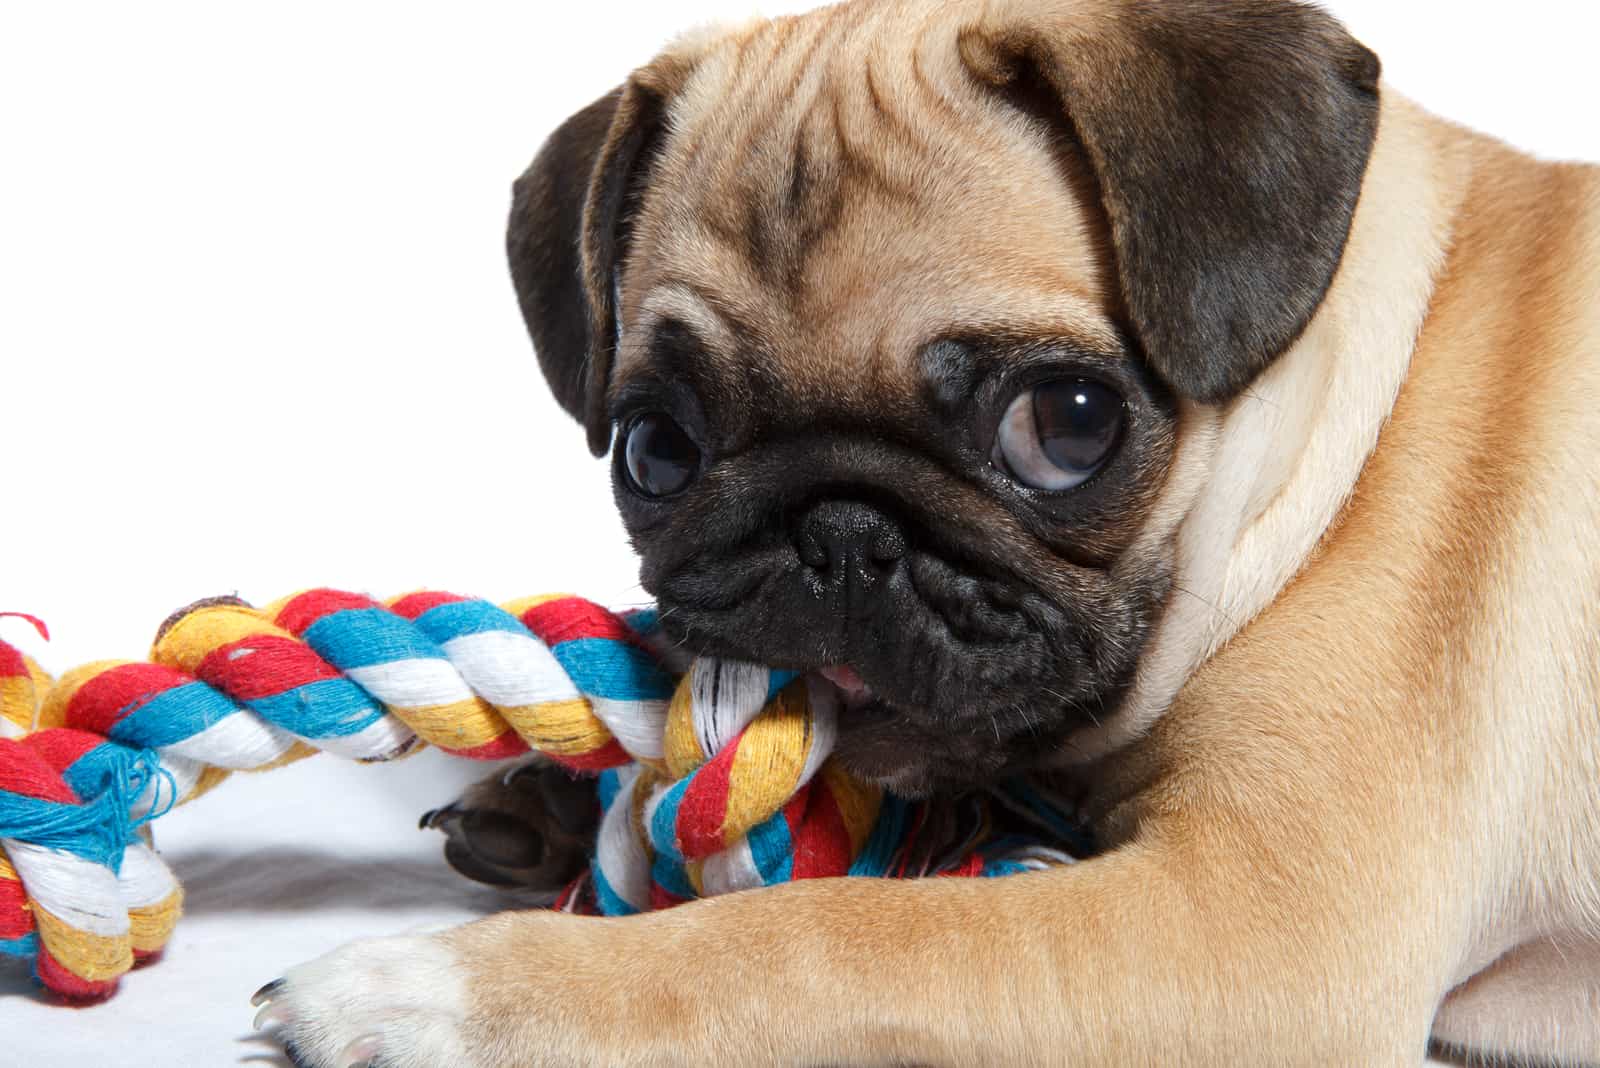 Pug biting colorful toy